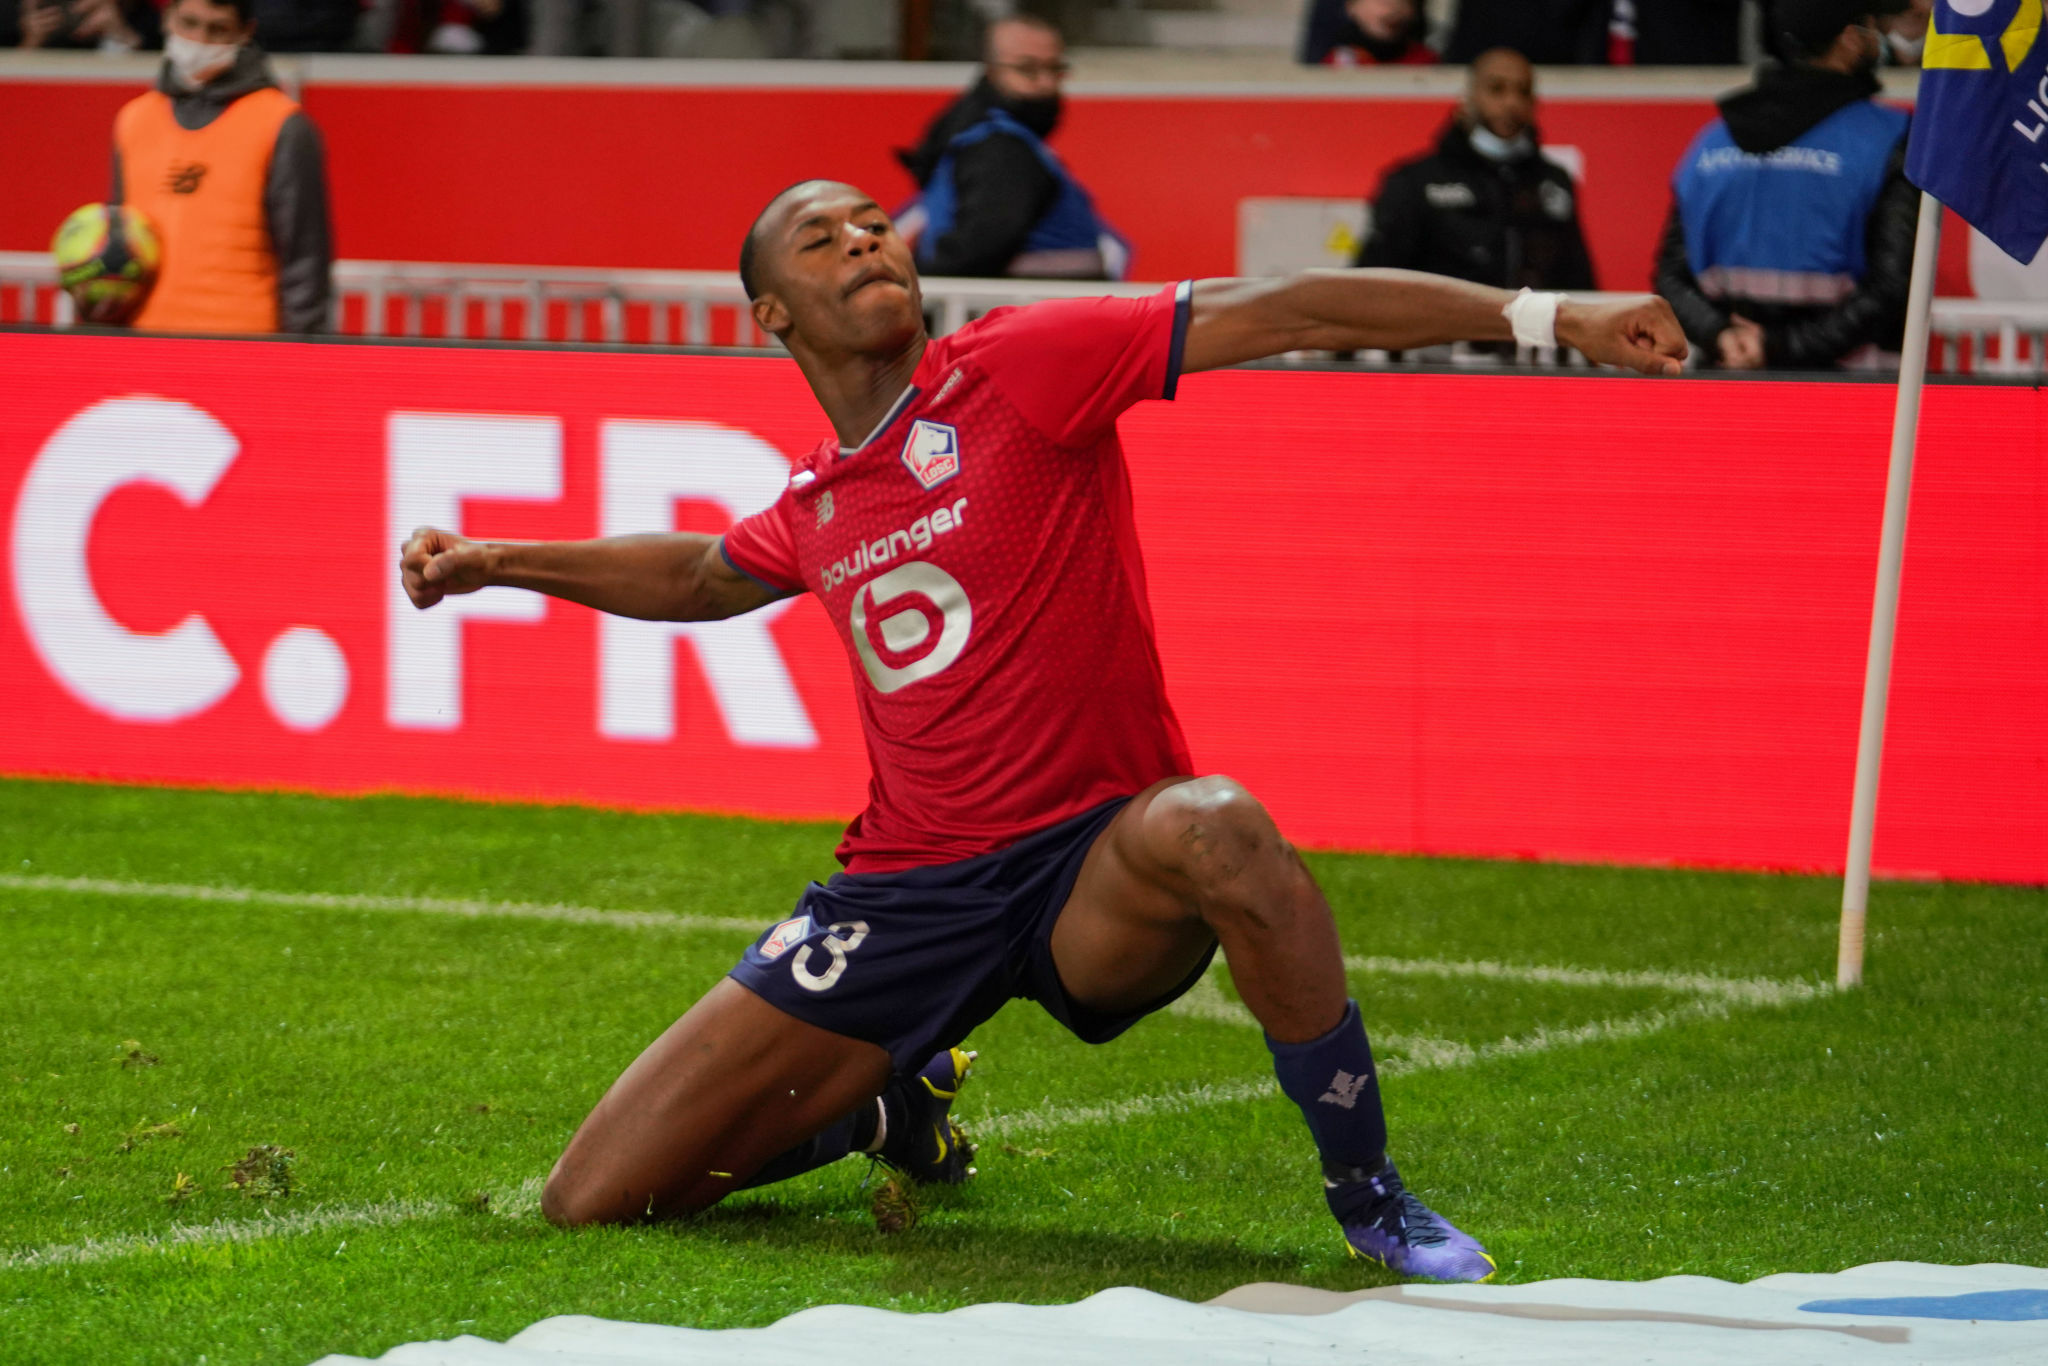 Juventus have overtaken Inter in the race to sign Tiago Djaló, striking an agreement with him as well after finding an understanding with Lille.